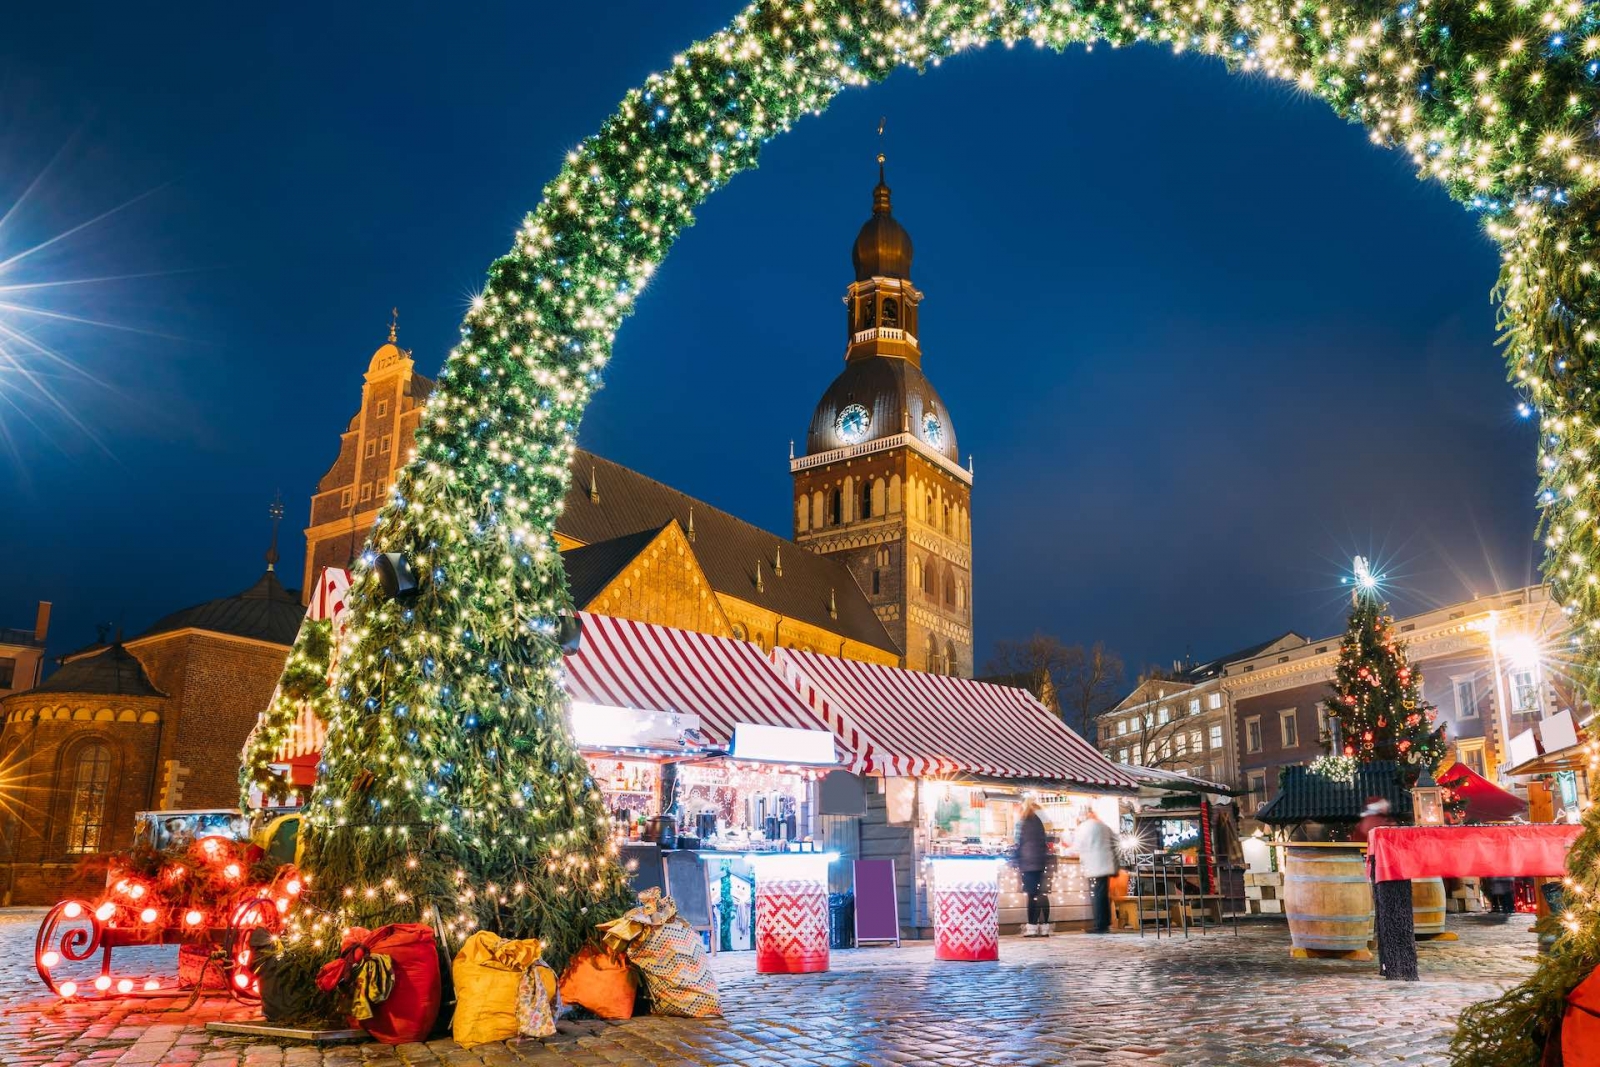 Riga, Latvia. Christmas Market On Dome Square With Riga Dome Cathedral. Christmas Tree And Trading Houses